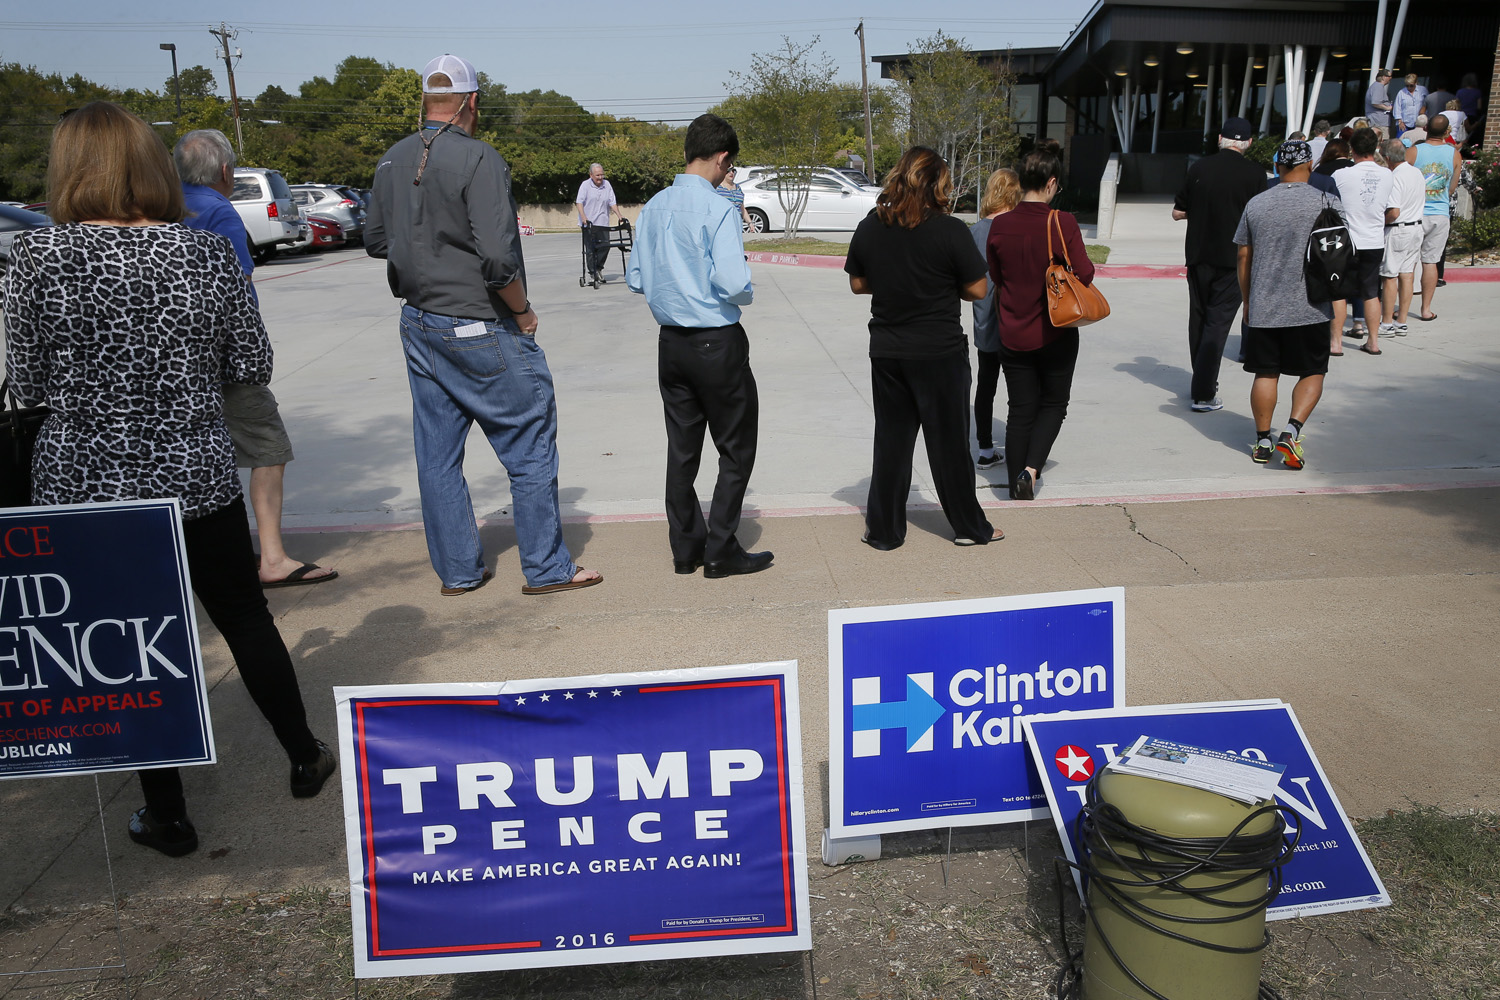 Early voters stand by campaign signage as they wait in line at a voting location in Dallas. (Tony Gutierrez/AP)